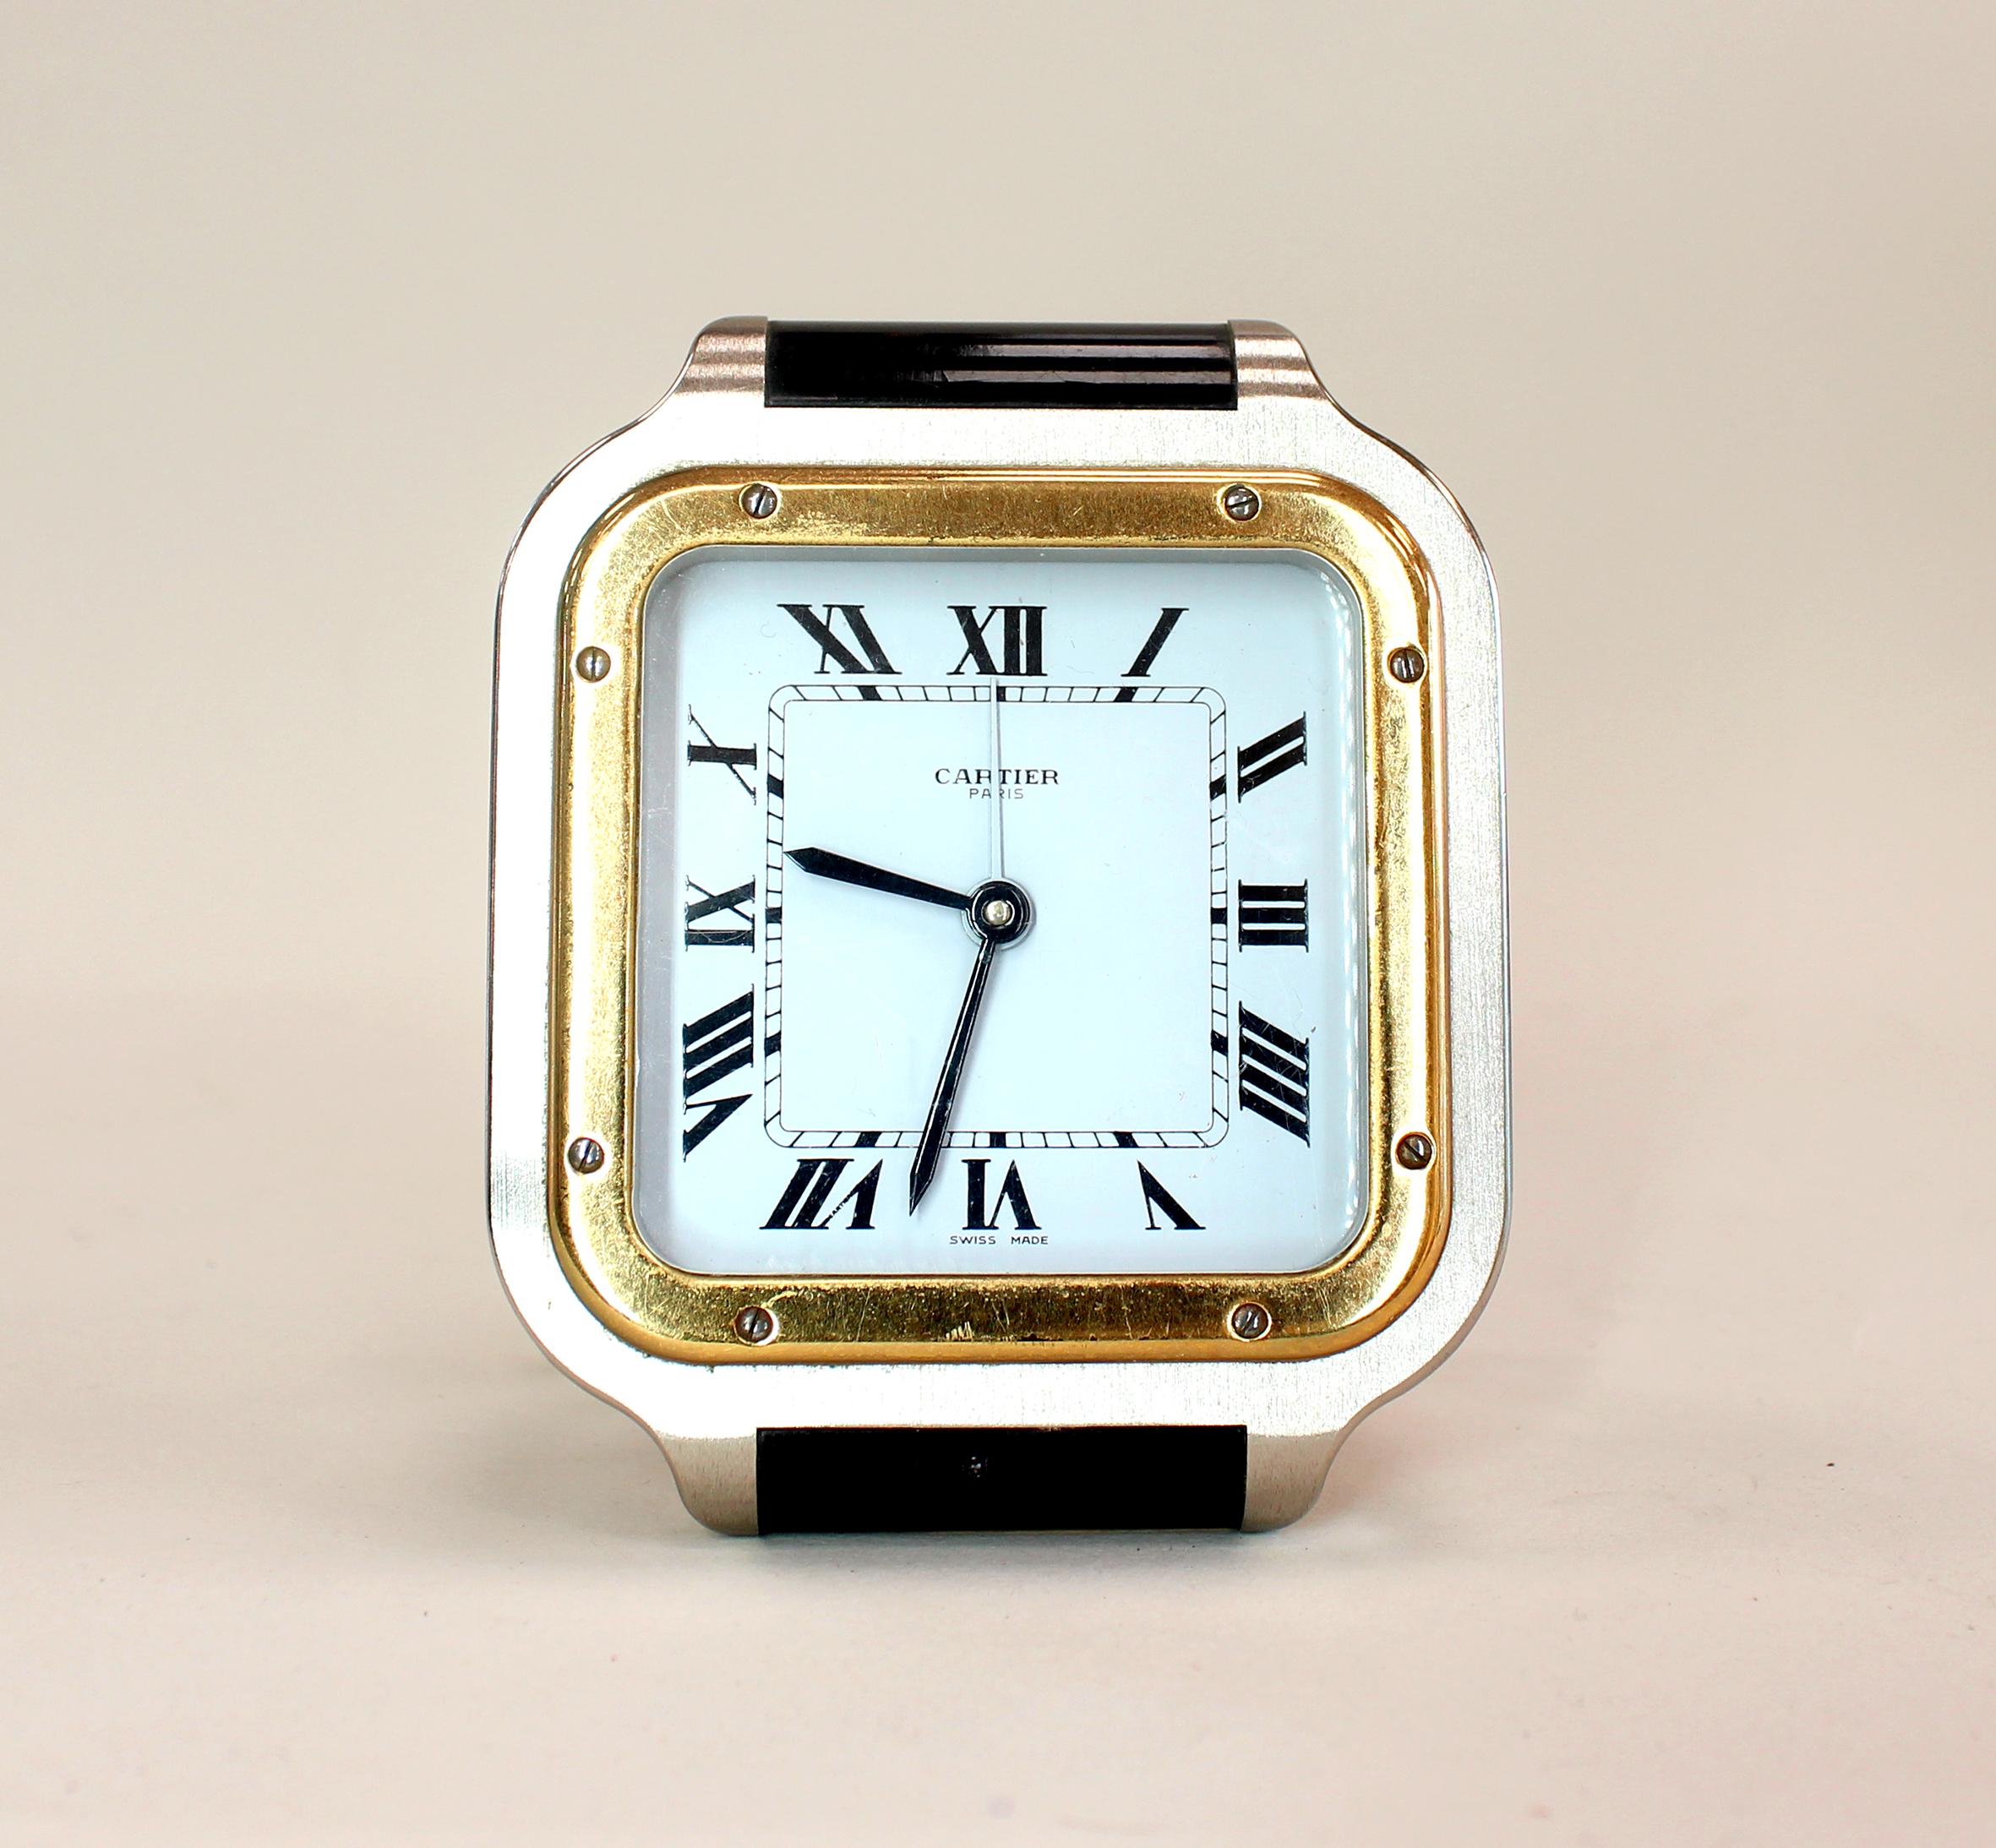 A Cartier Alarm desk clock in the form of the iconic Santos de Cartier watch. With a gold bezel, brushed steel case and black enamel detail. The gold plated back houses a Swiss made Quartz Movement with cabochon cut setting nut, stamped and numbered